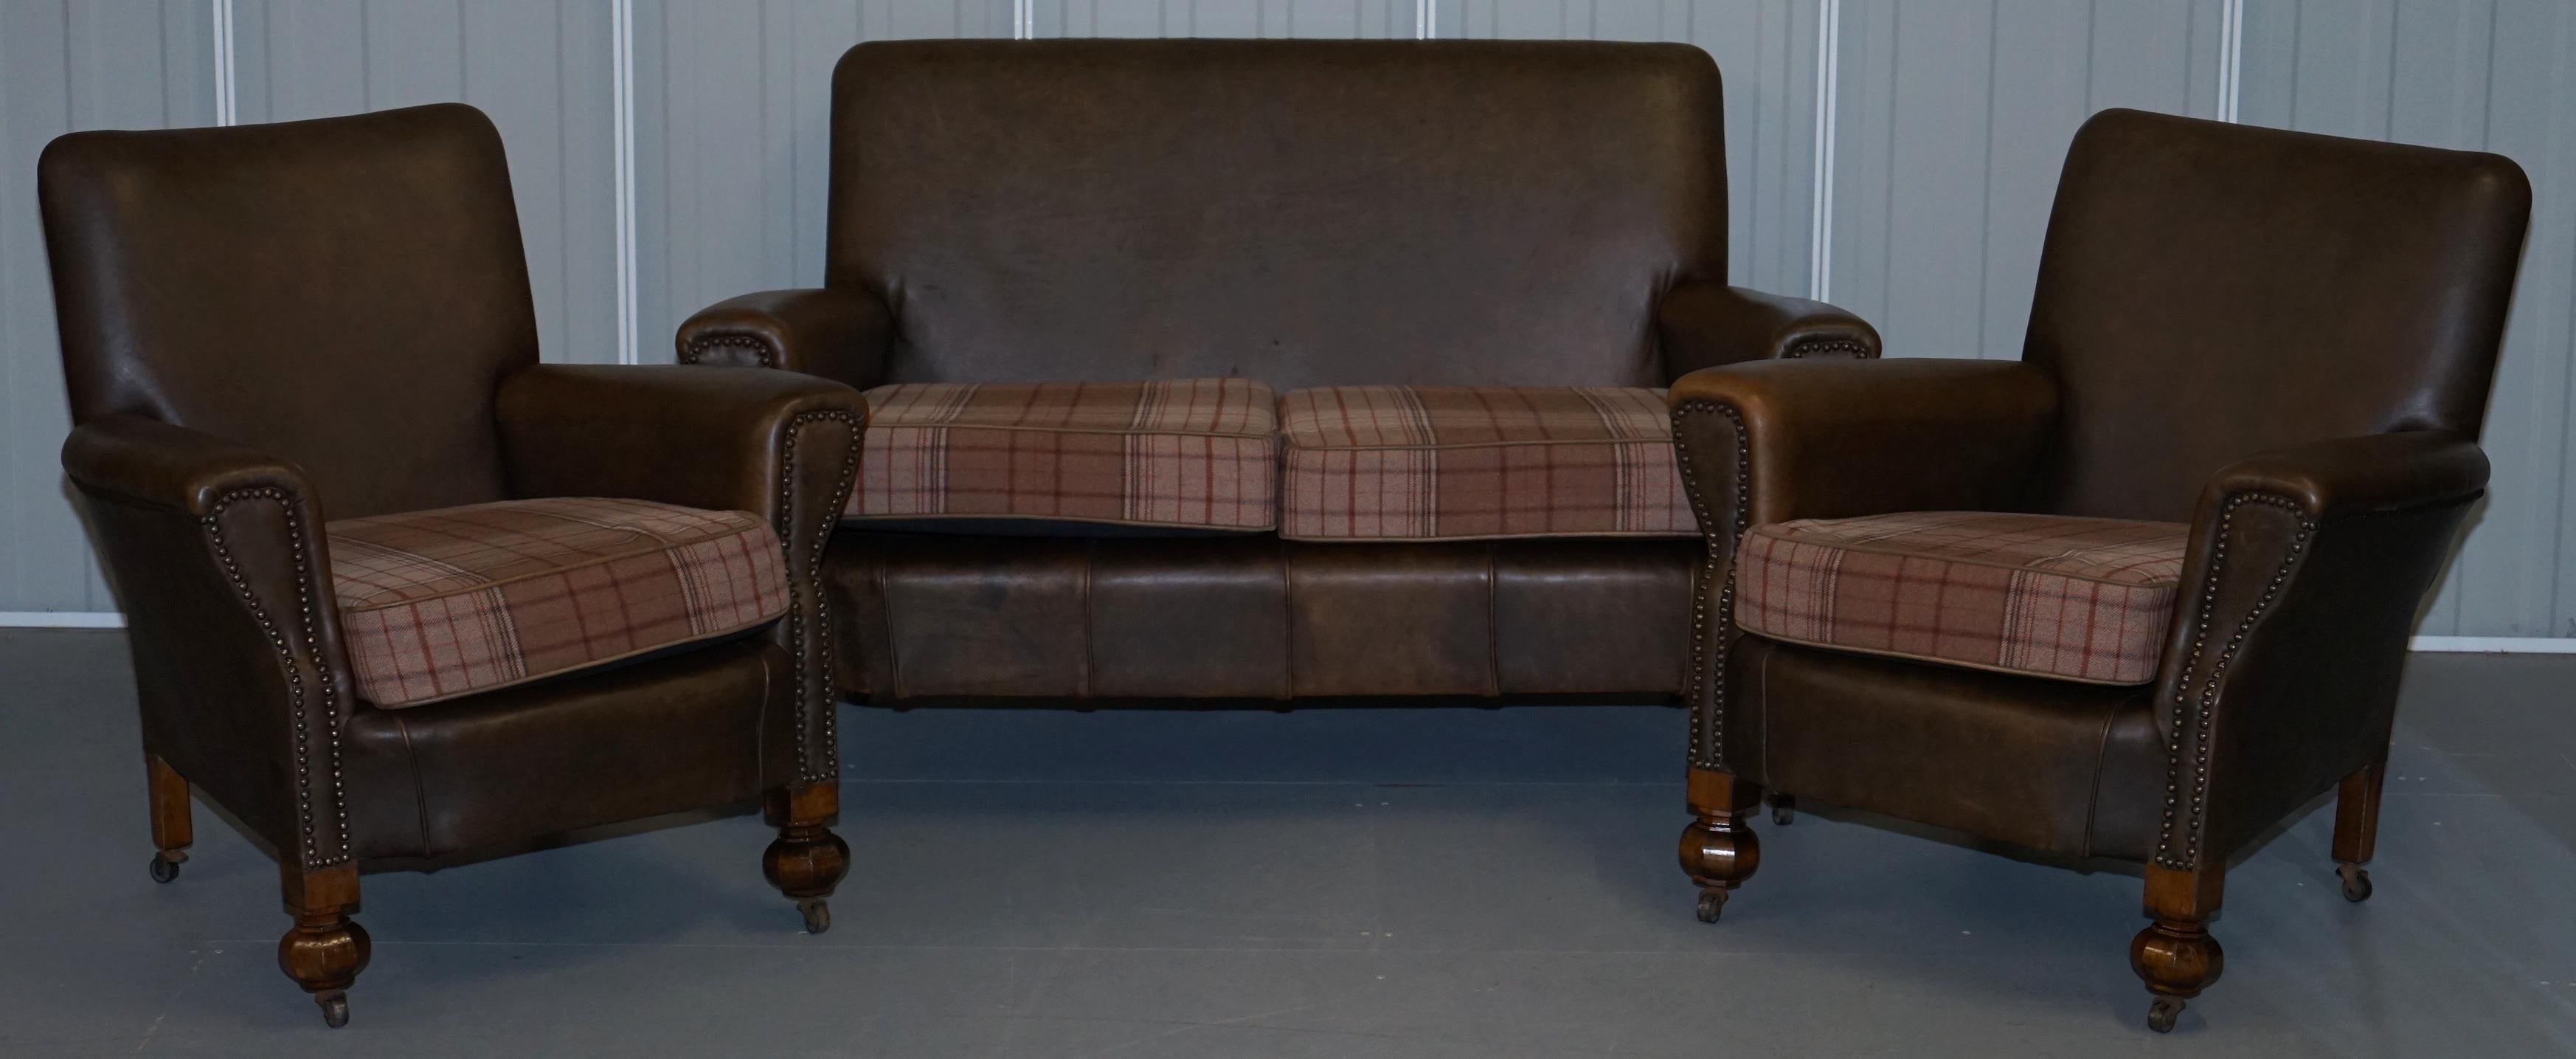 We are delighted to offer for sale this stunning walnut framed Edwardian brown leather three-piece suite with Scottish tartan wool cushions

A very good looking and well-made suite, the frames are all solid walnut, each piece has period Industrial